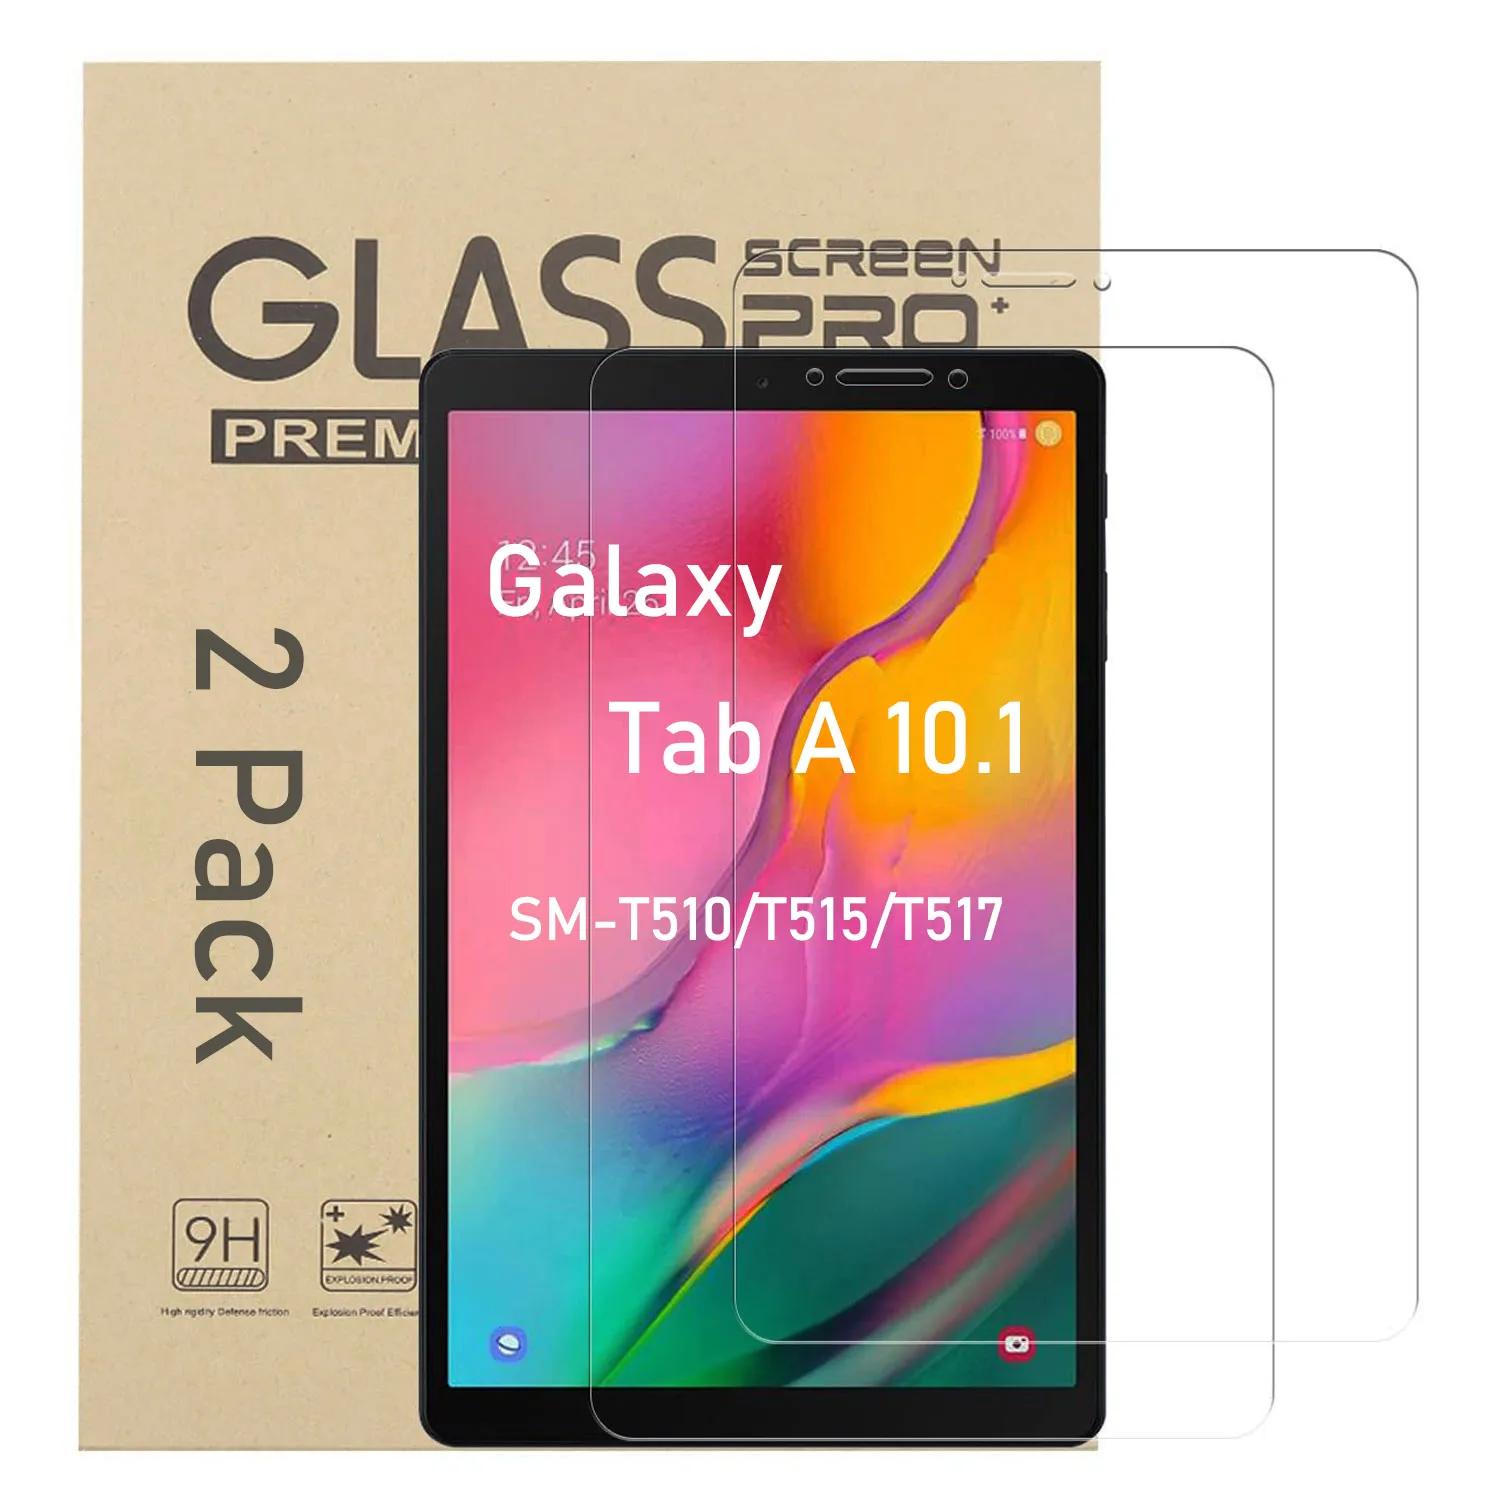 ( 2 Pack ) Tempered Glass For Samsung Galaxy Tab A 10.1 2019 SM-T510 SM-T515 T510 T515 T517 Tablet Screen Protector Film